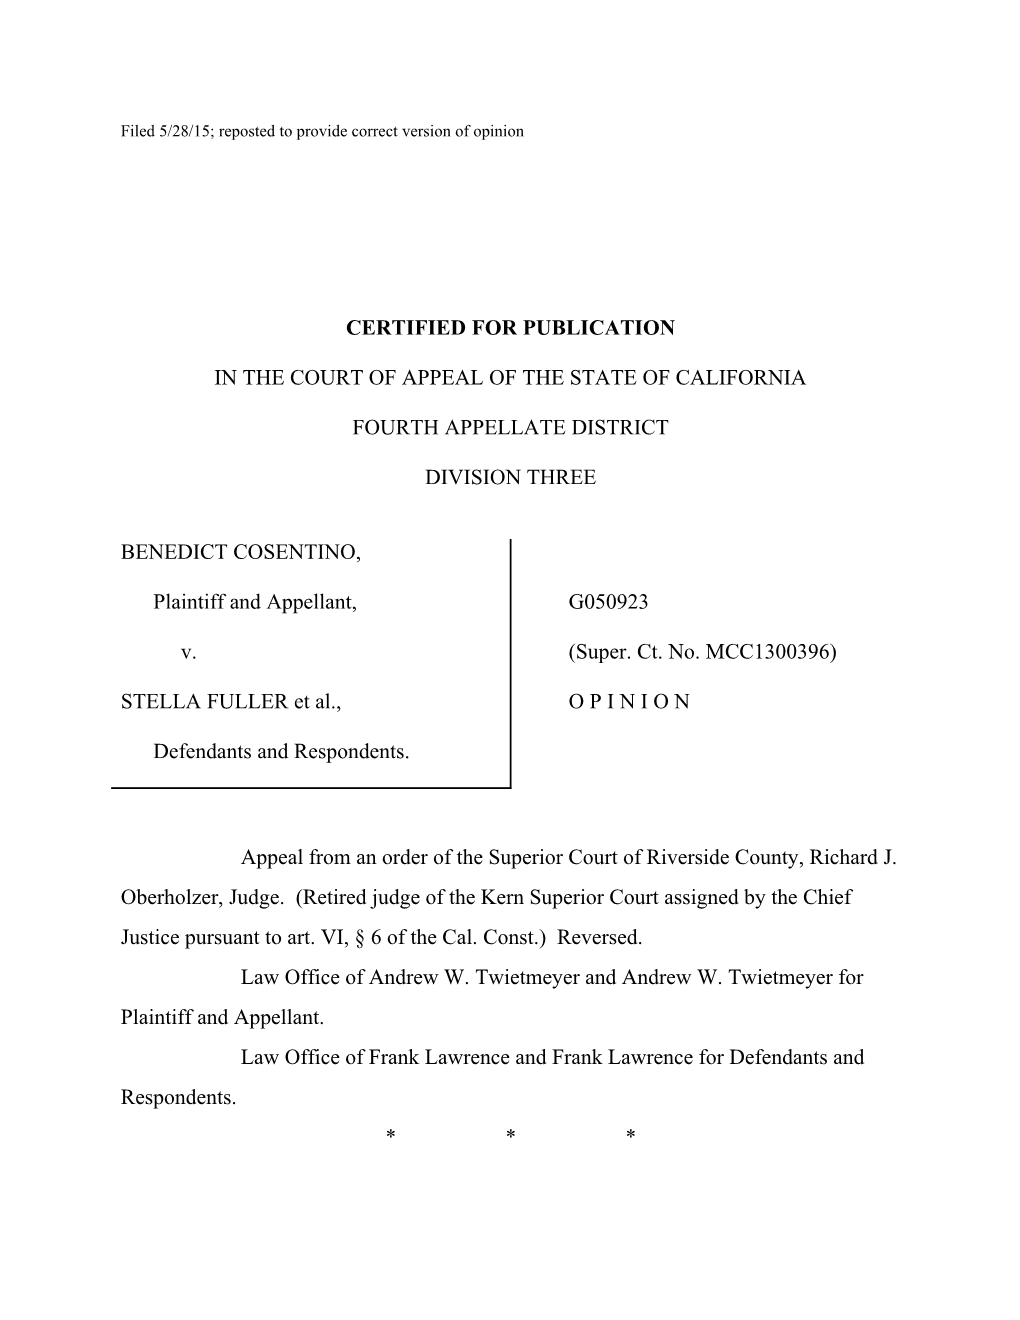 Filed 5/28/15; Reposted to Provide Correct Version of Opinion